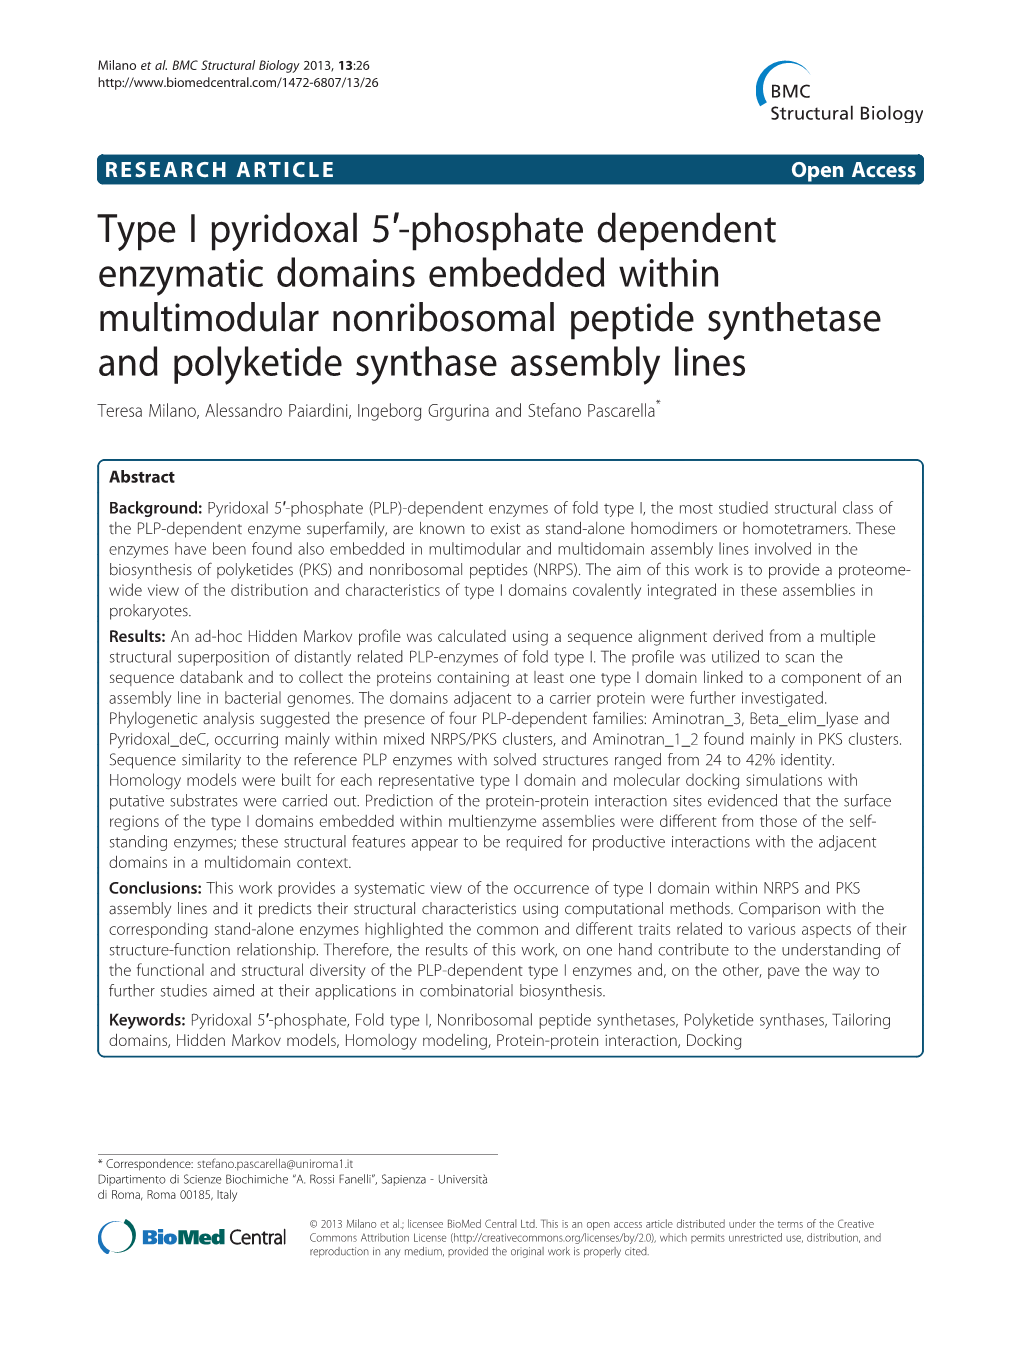 Phosphate Dependent Enzymatic Domains Embedded Within